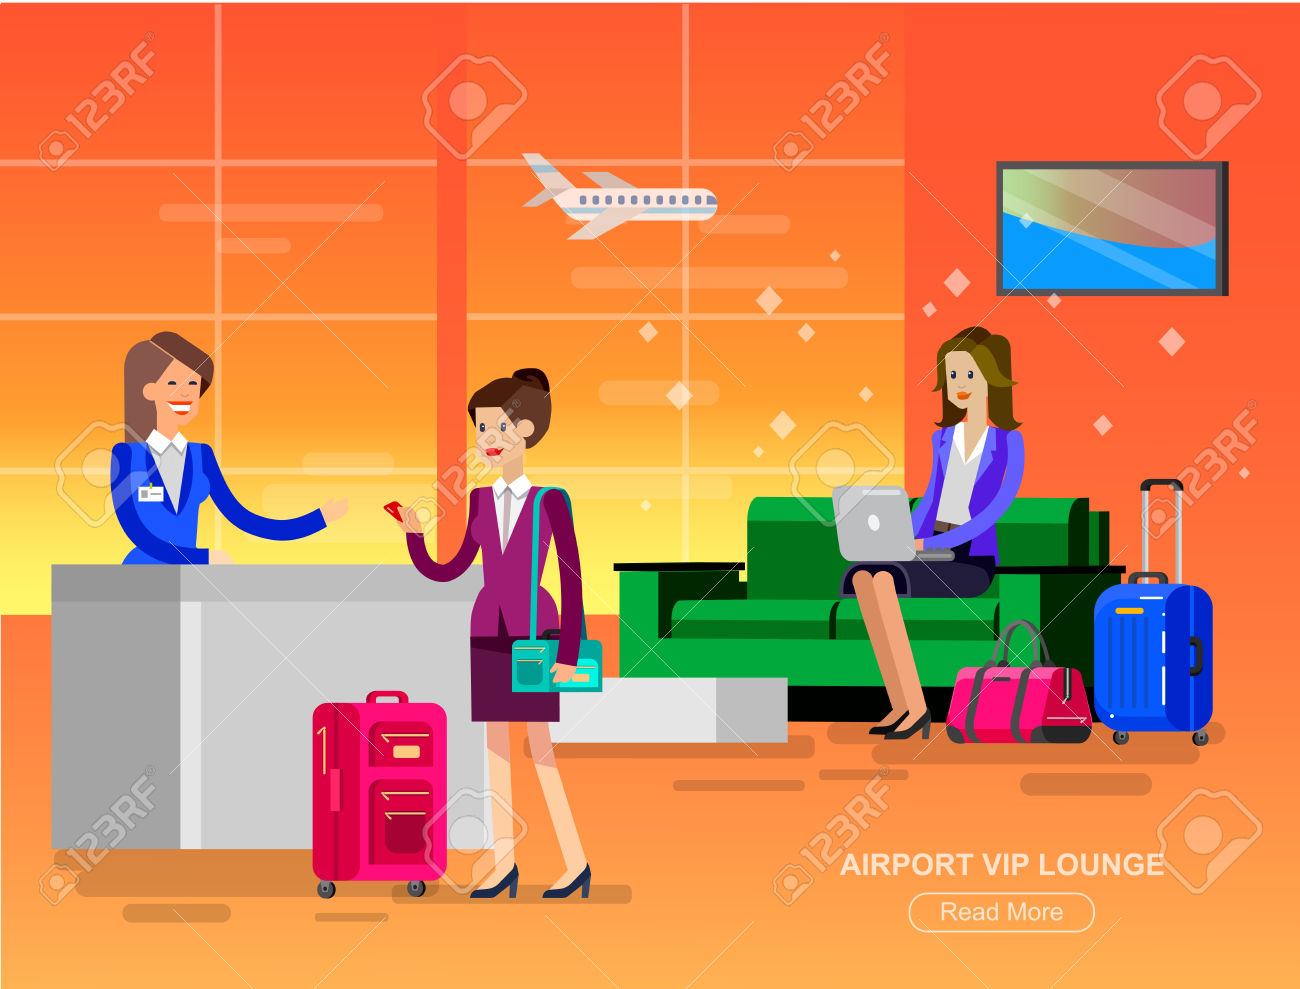 airport lounge clipart - photo #29